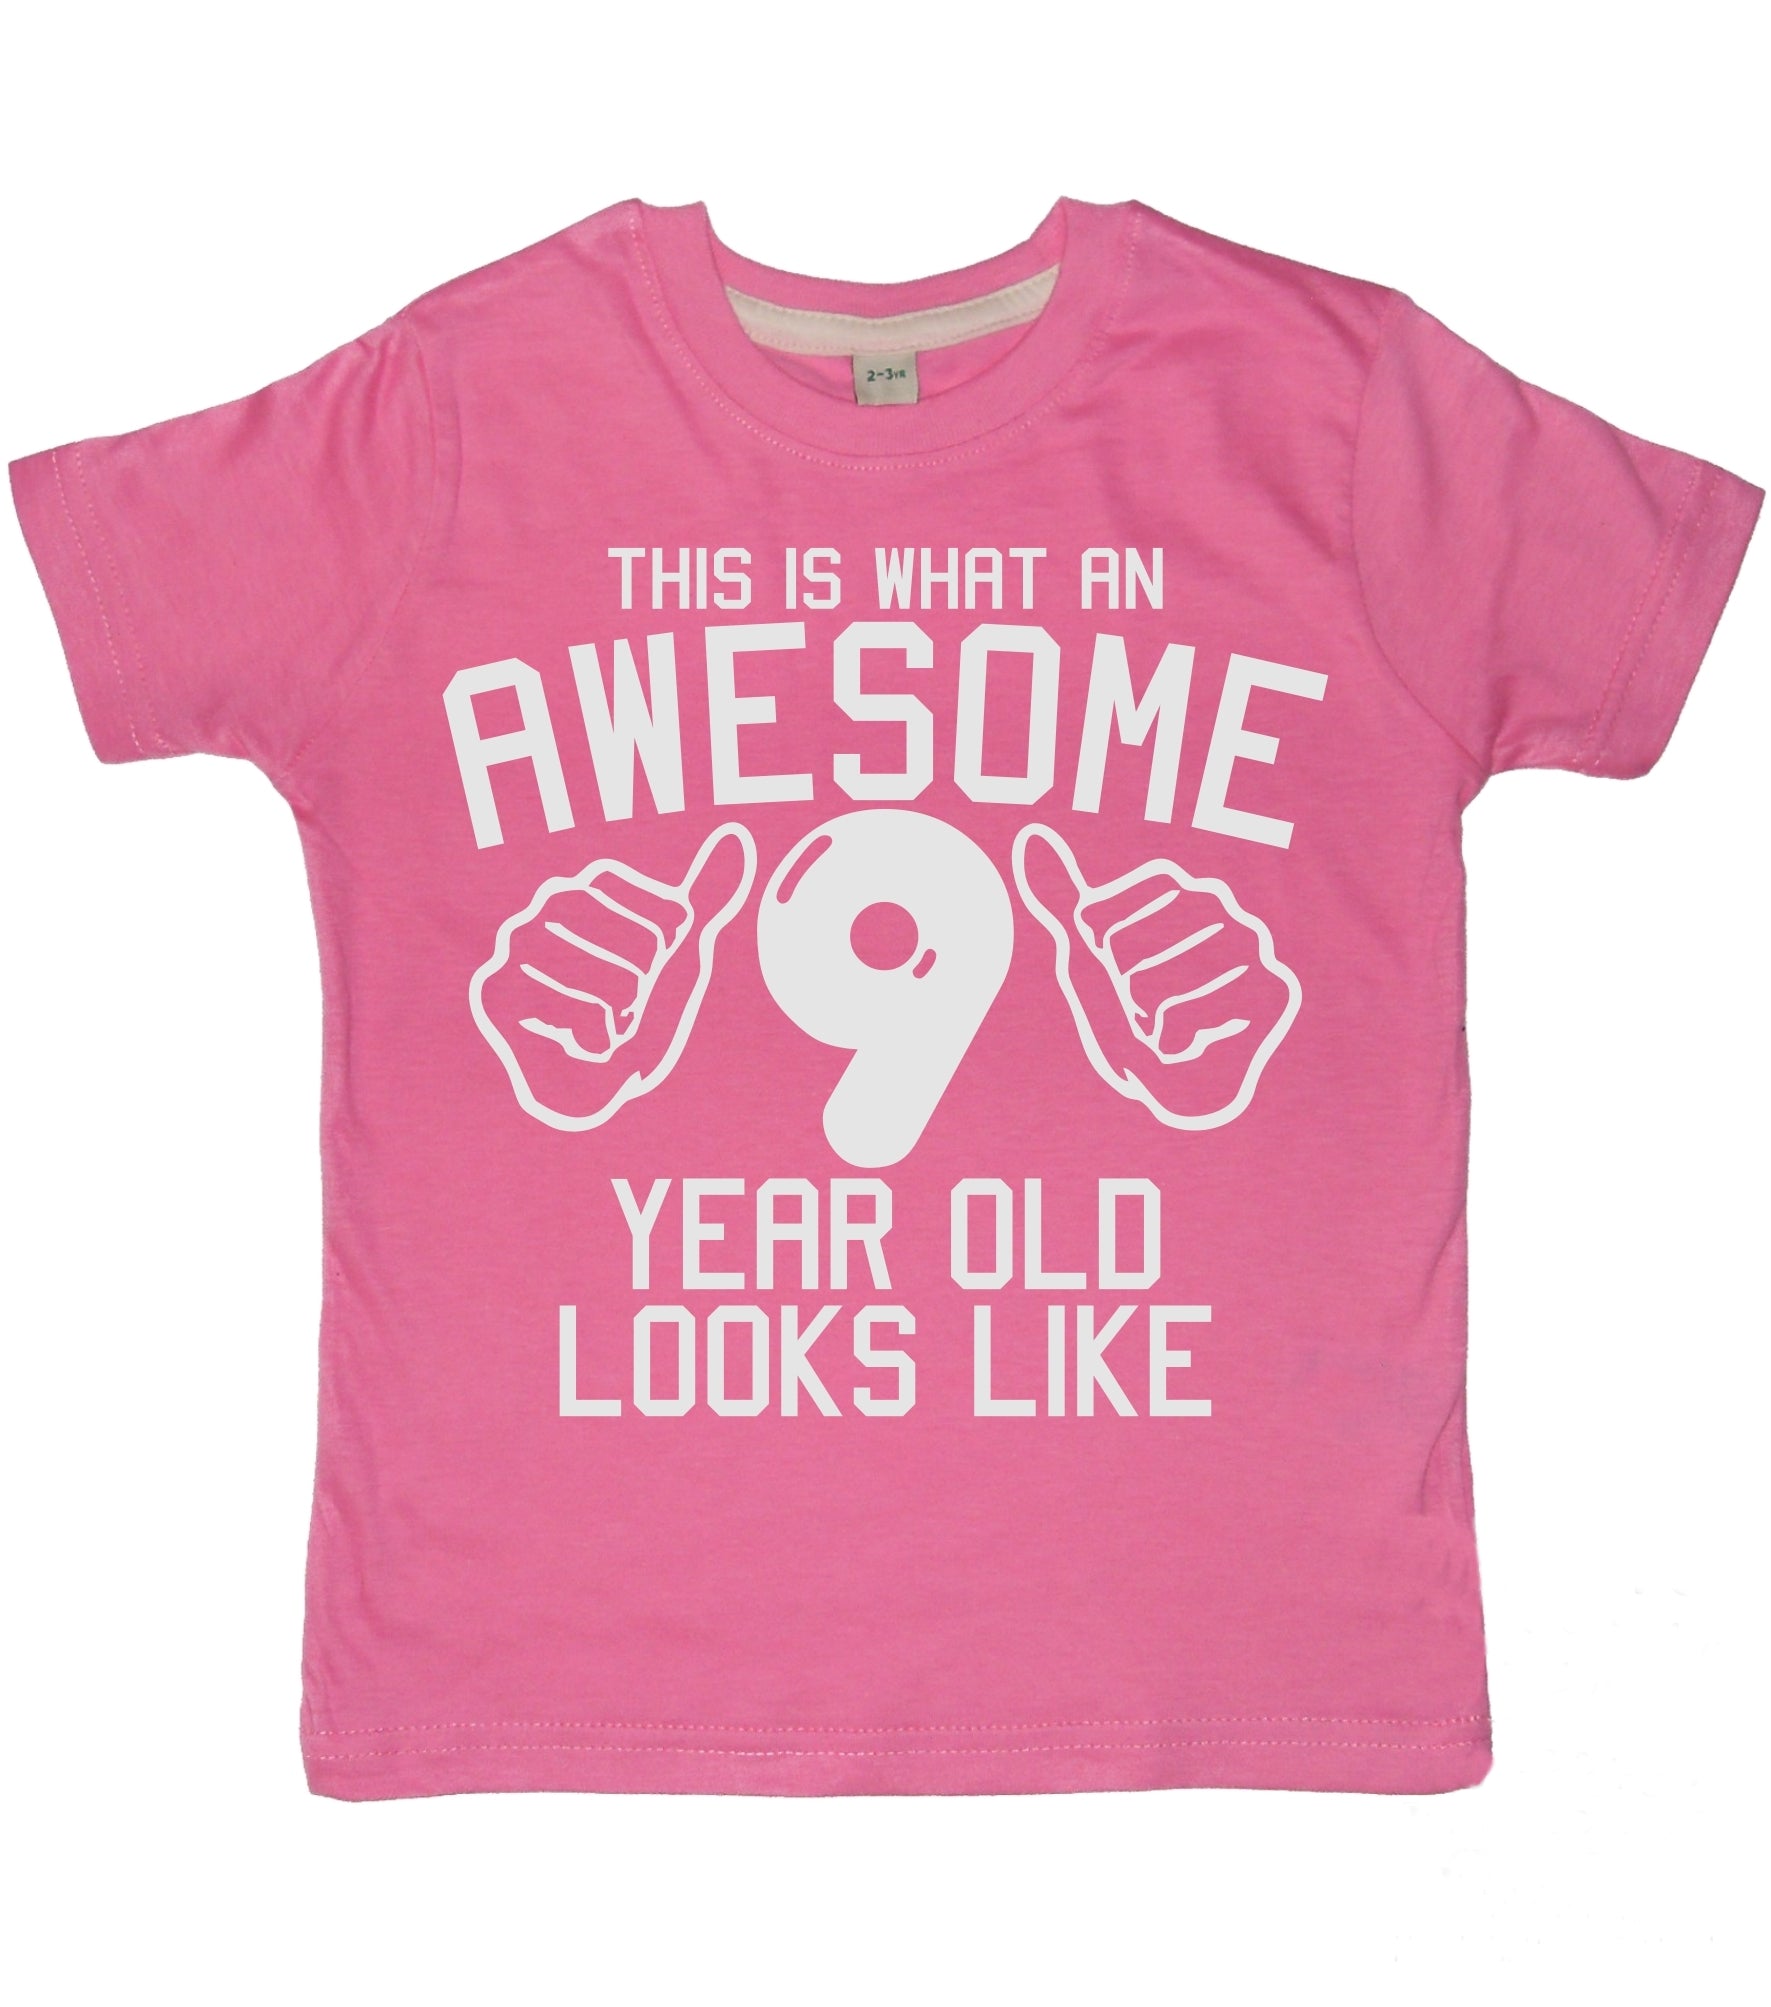 This What an Awesome 9 Year Old Looks Like Children's T Shirt